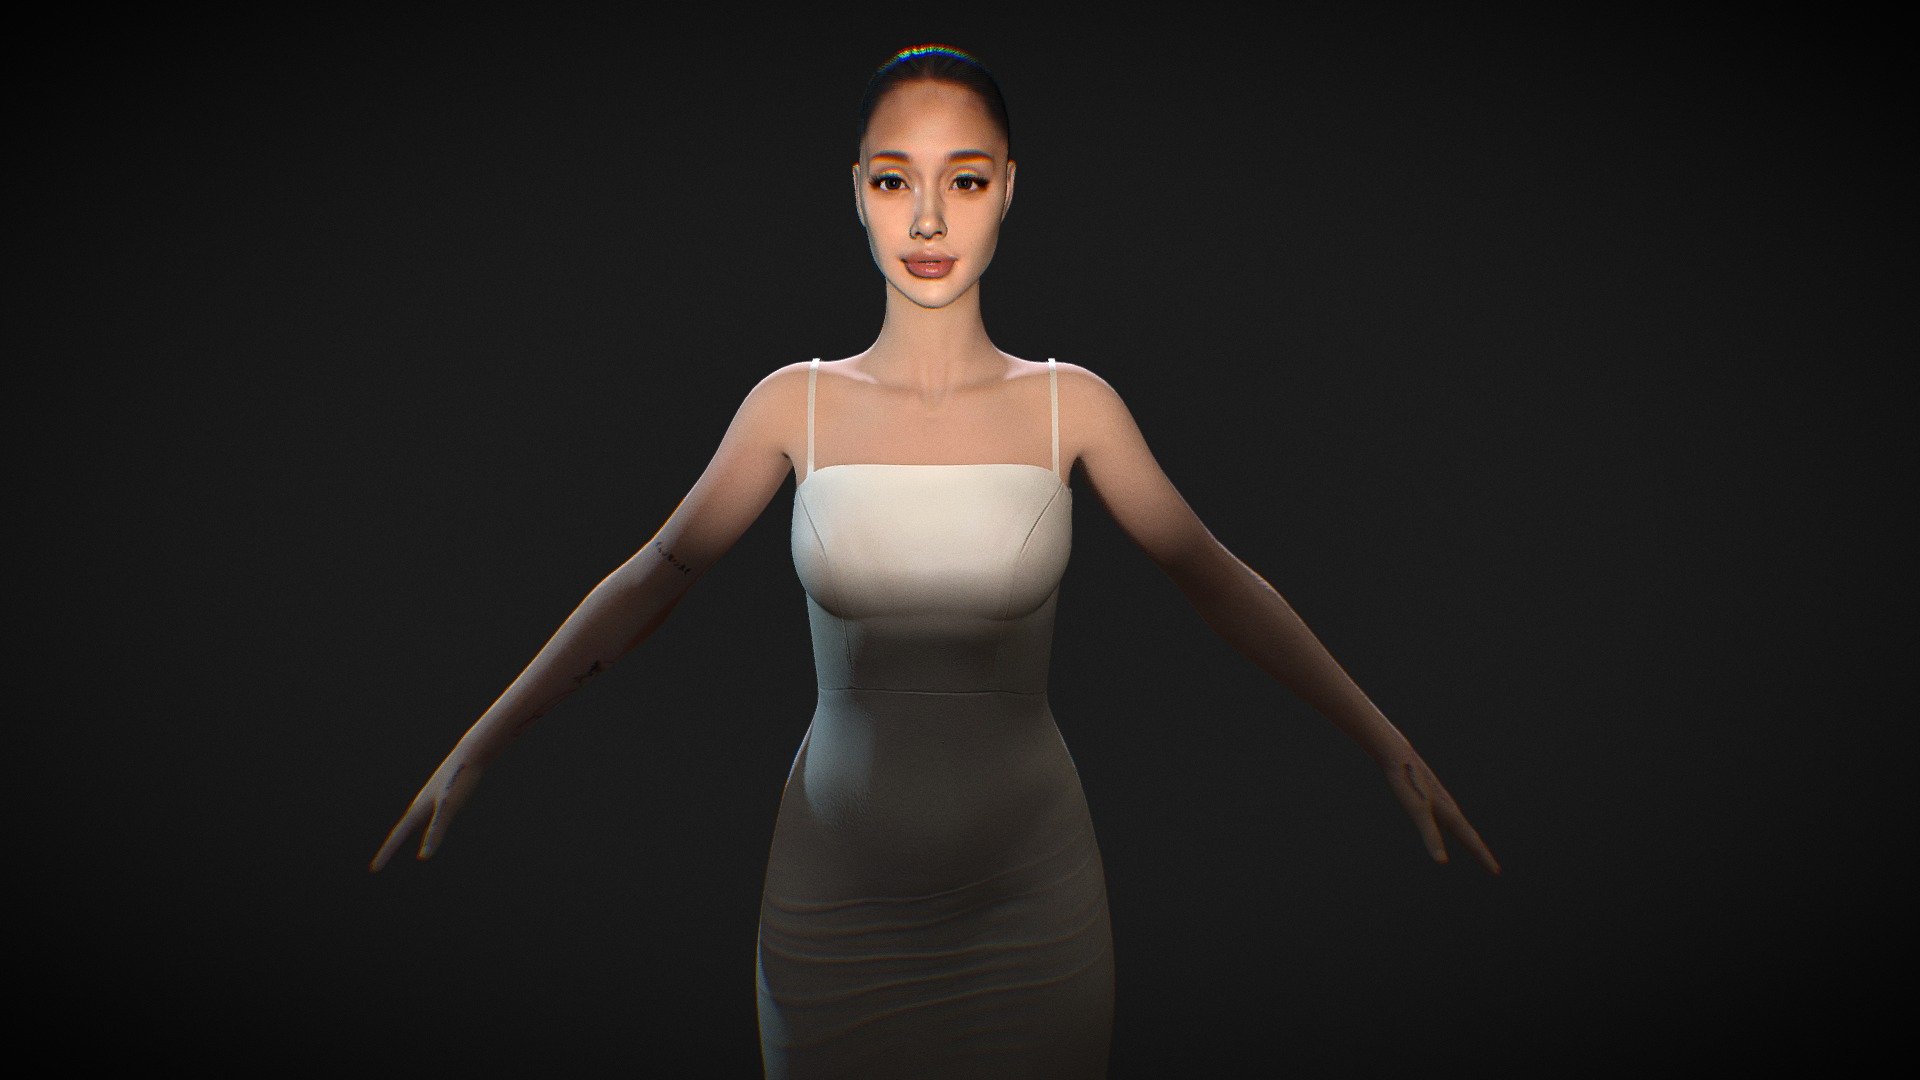 This is a model I did of Ariana Grande a while ago. I think I wasn´t so spot on on her likeness but I try, and finally figue out how to make the alpha hair maps look decent on this website!.
Hope you like it.

This model is not rigged 3d model